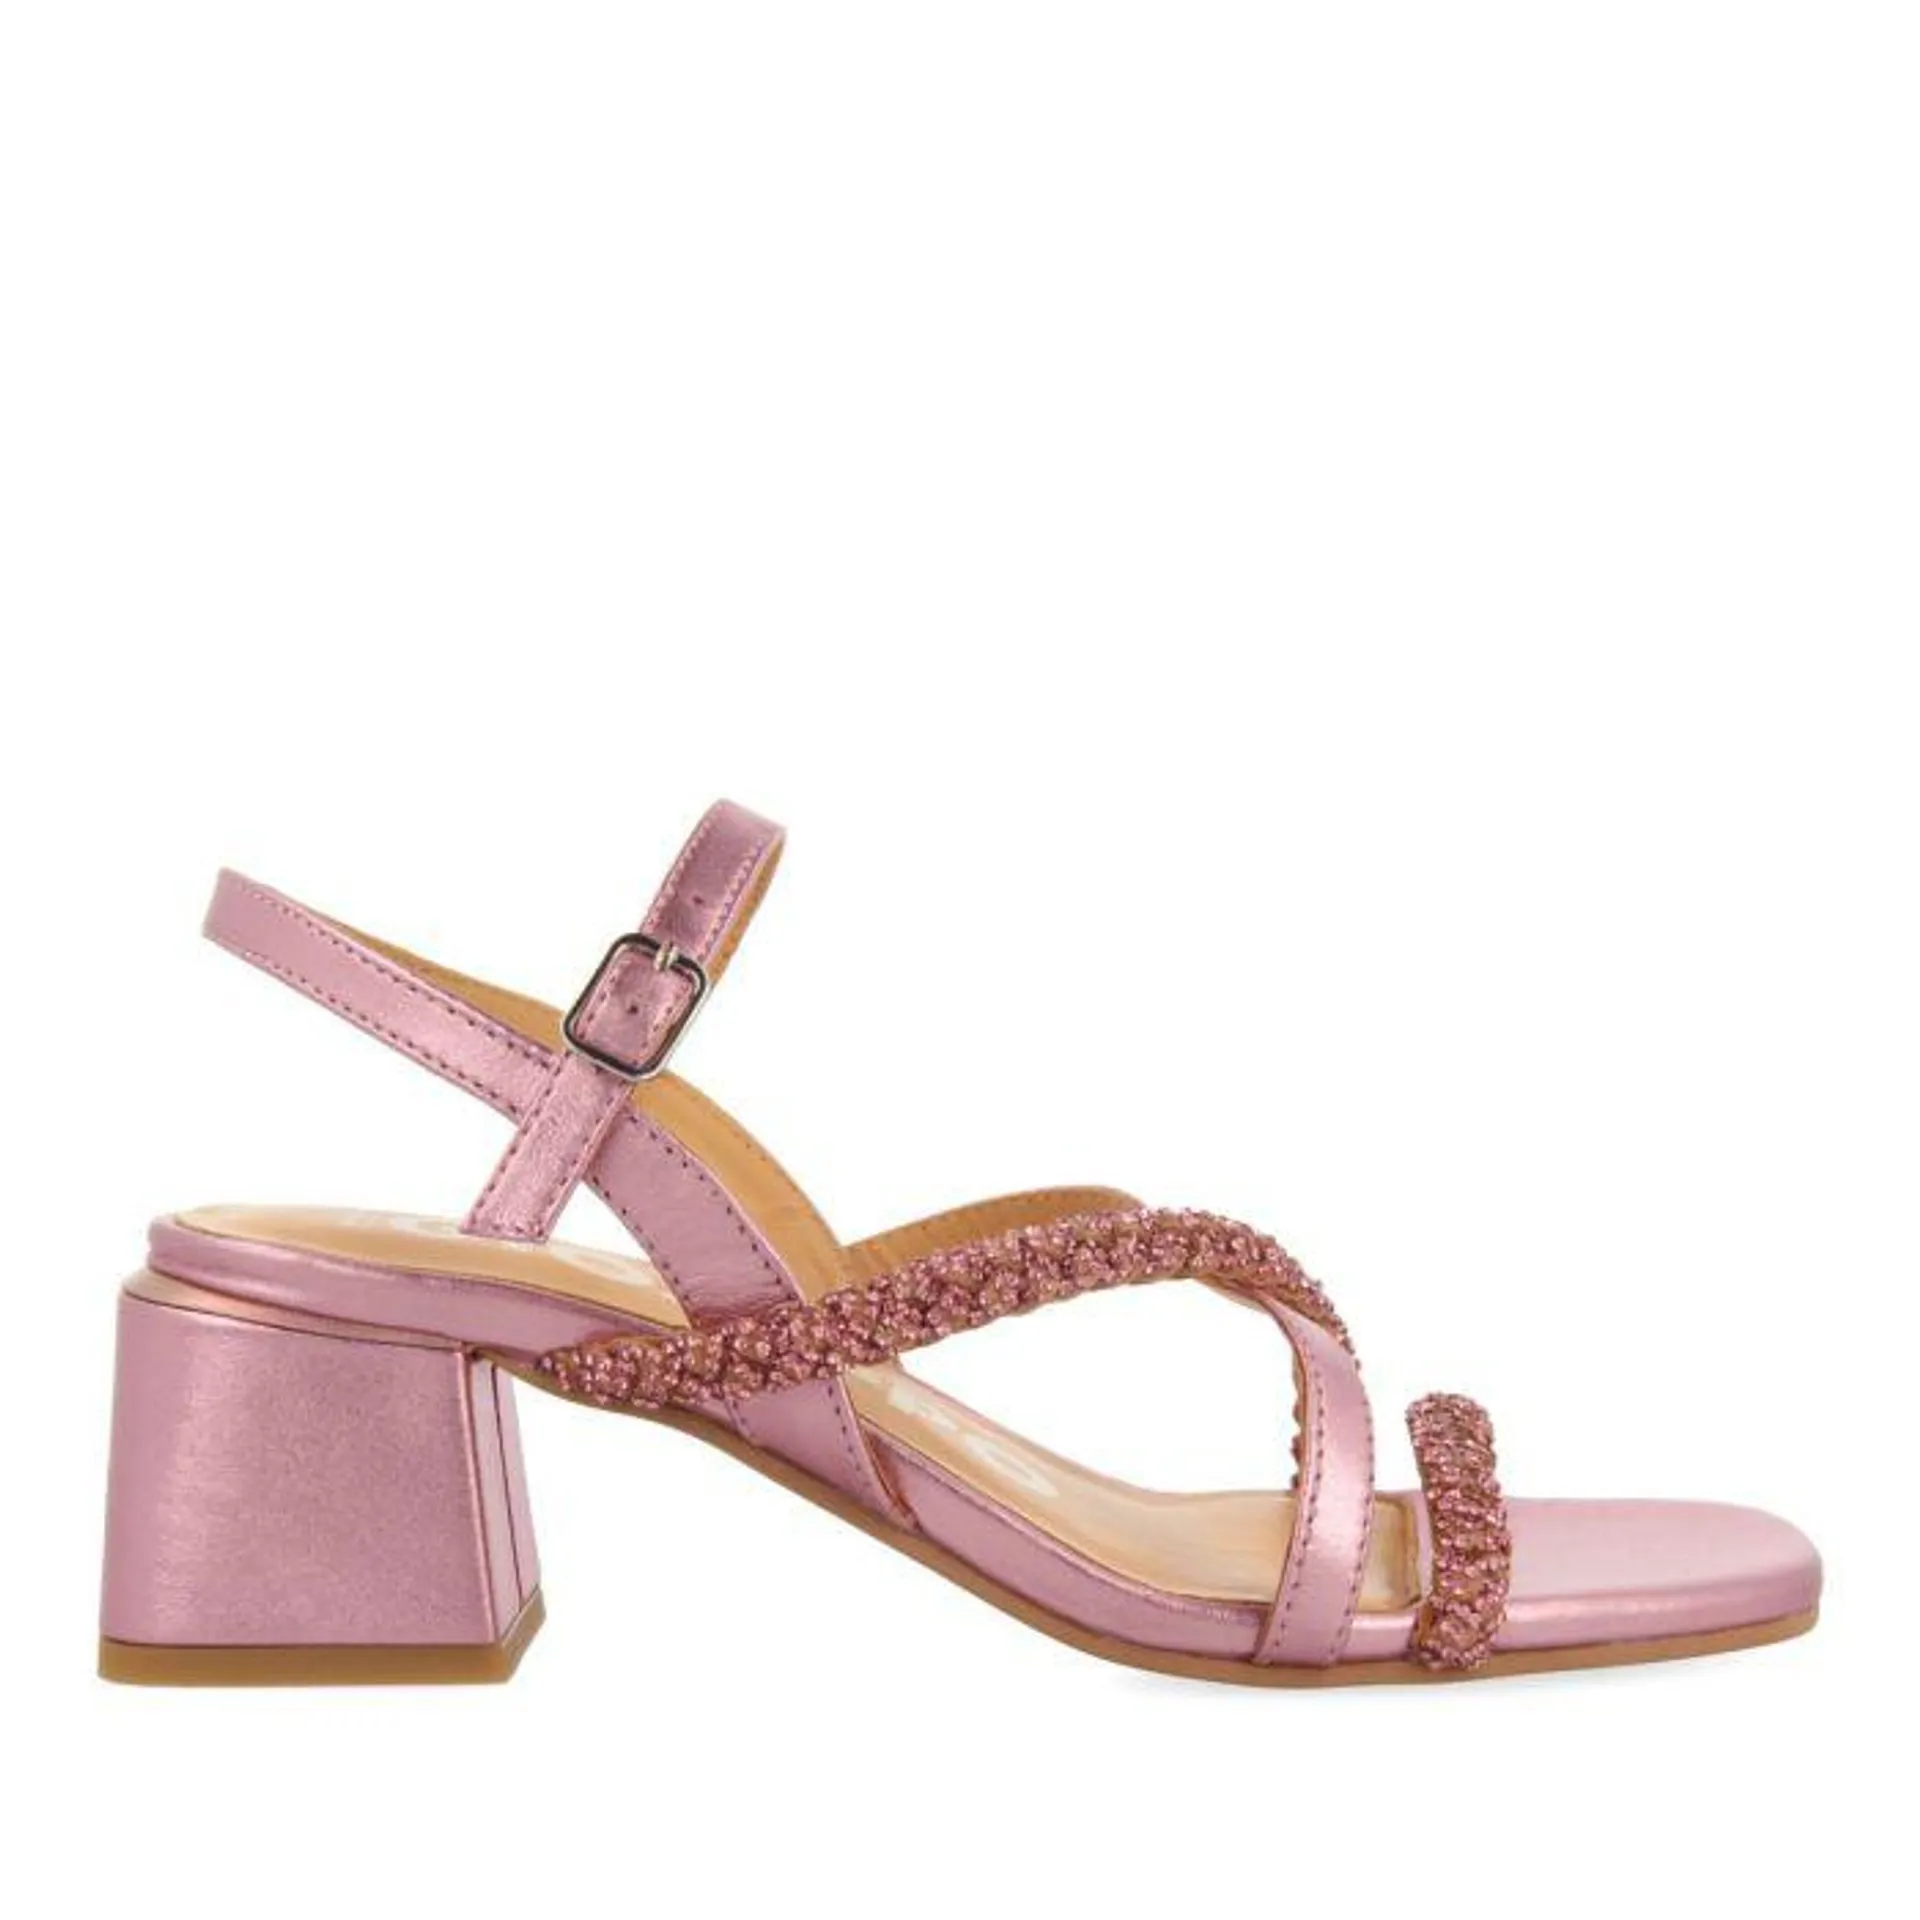 FUCHSIA HEEL SANDALS WITH STRAPS AND RHINESTONE DETAILS FOR WOMEN NISCEMI